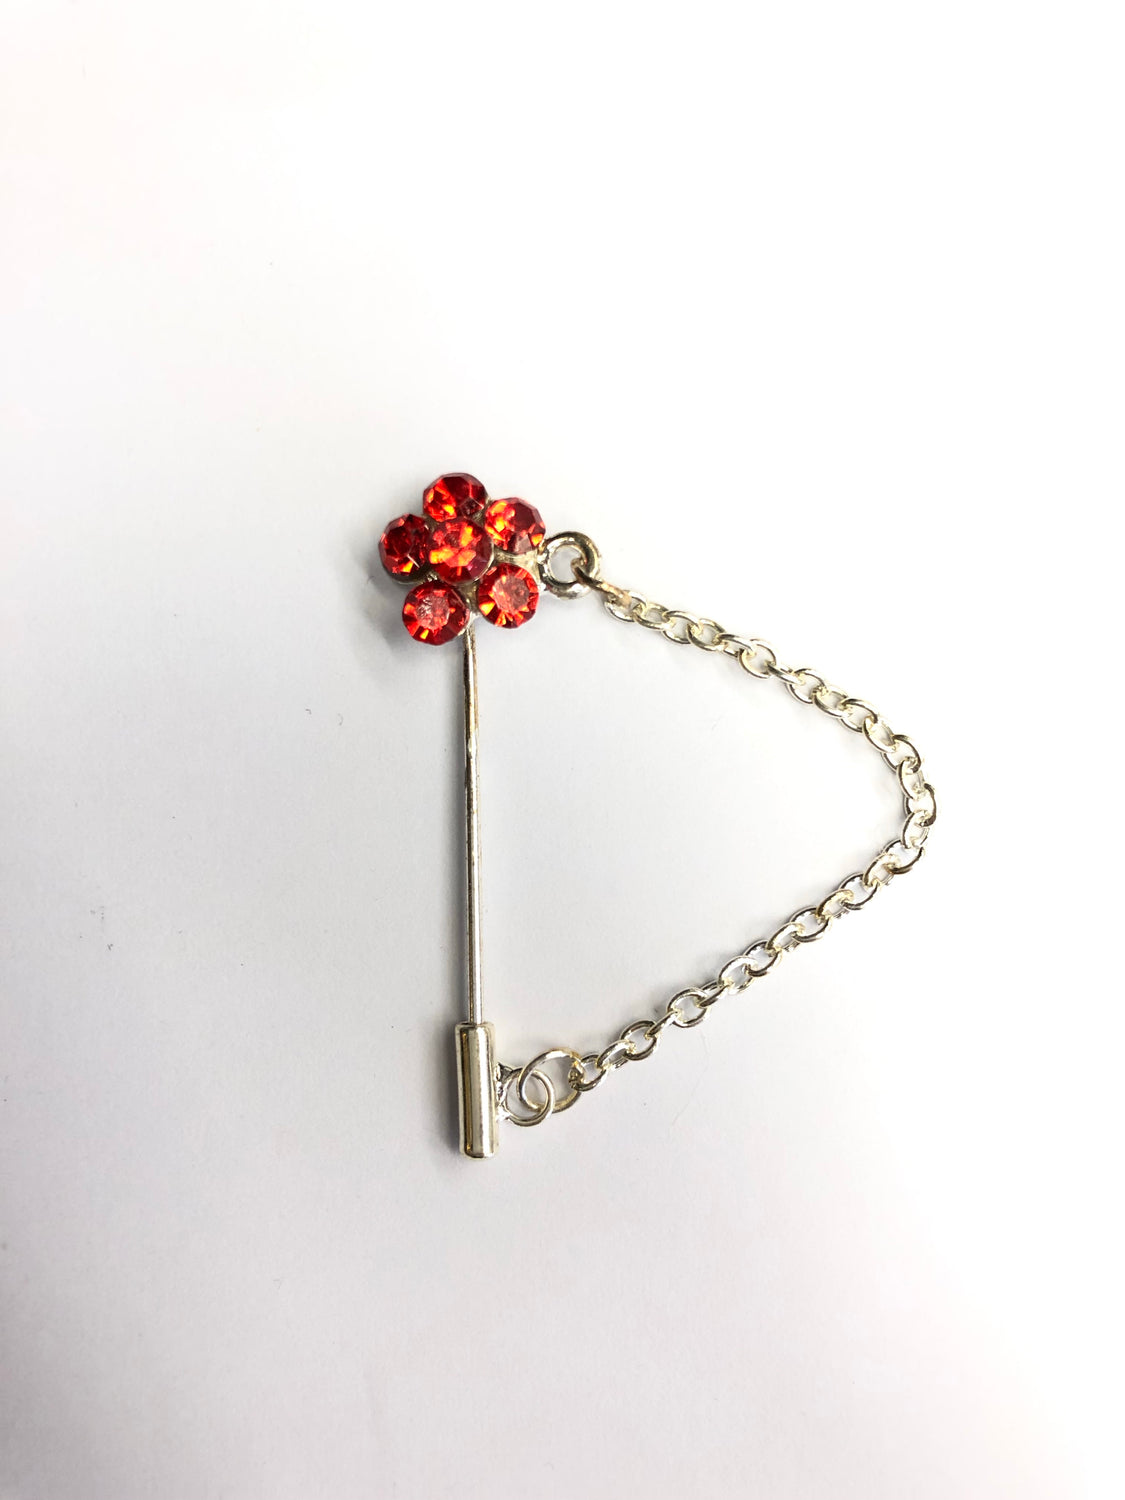 silver clasp pin with red floral jewel and a chain